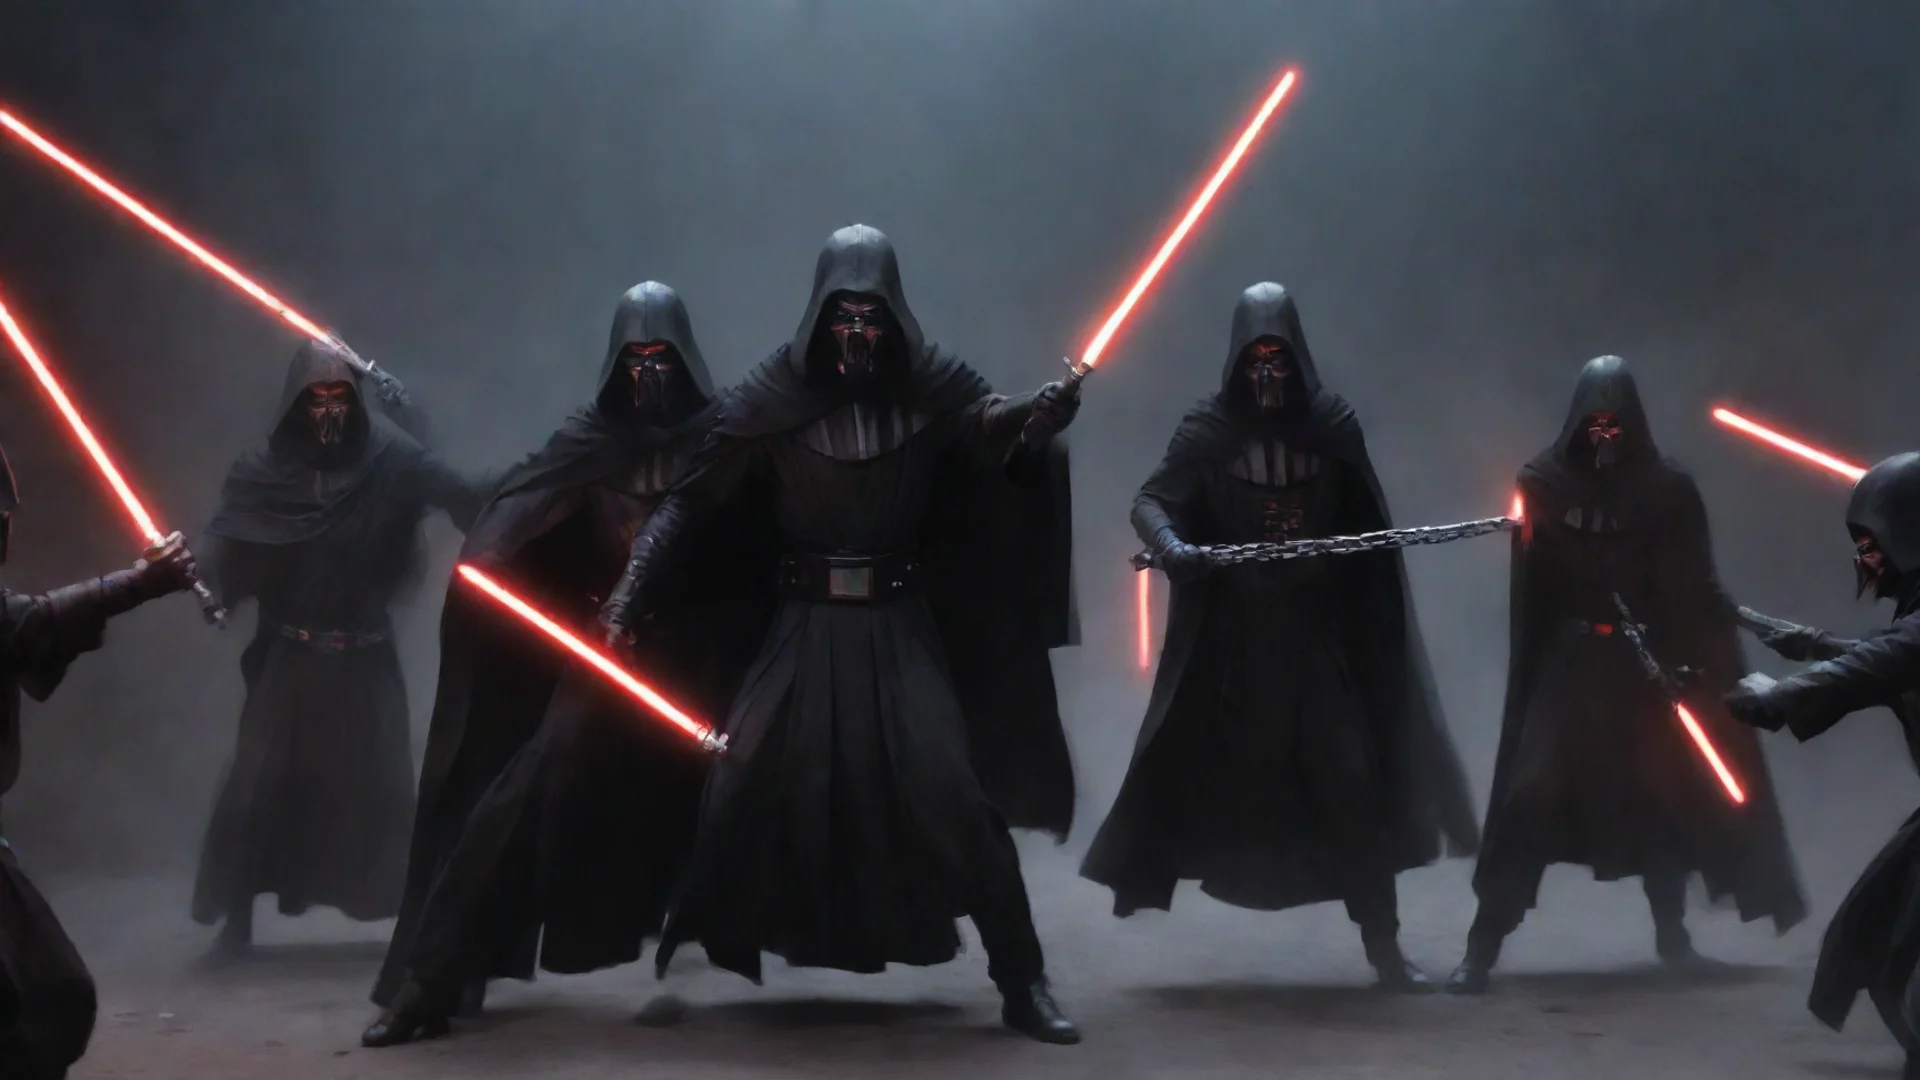 sith lords attacking a metal chain wide